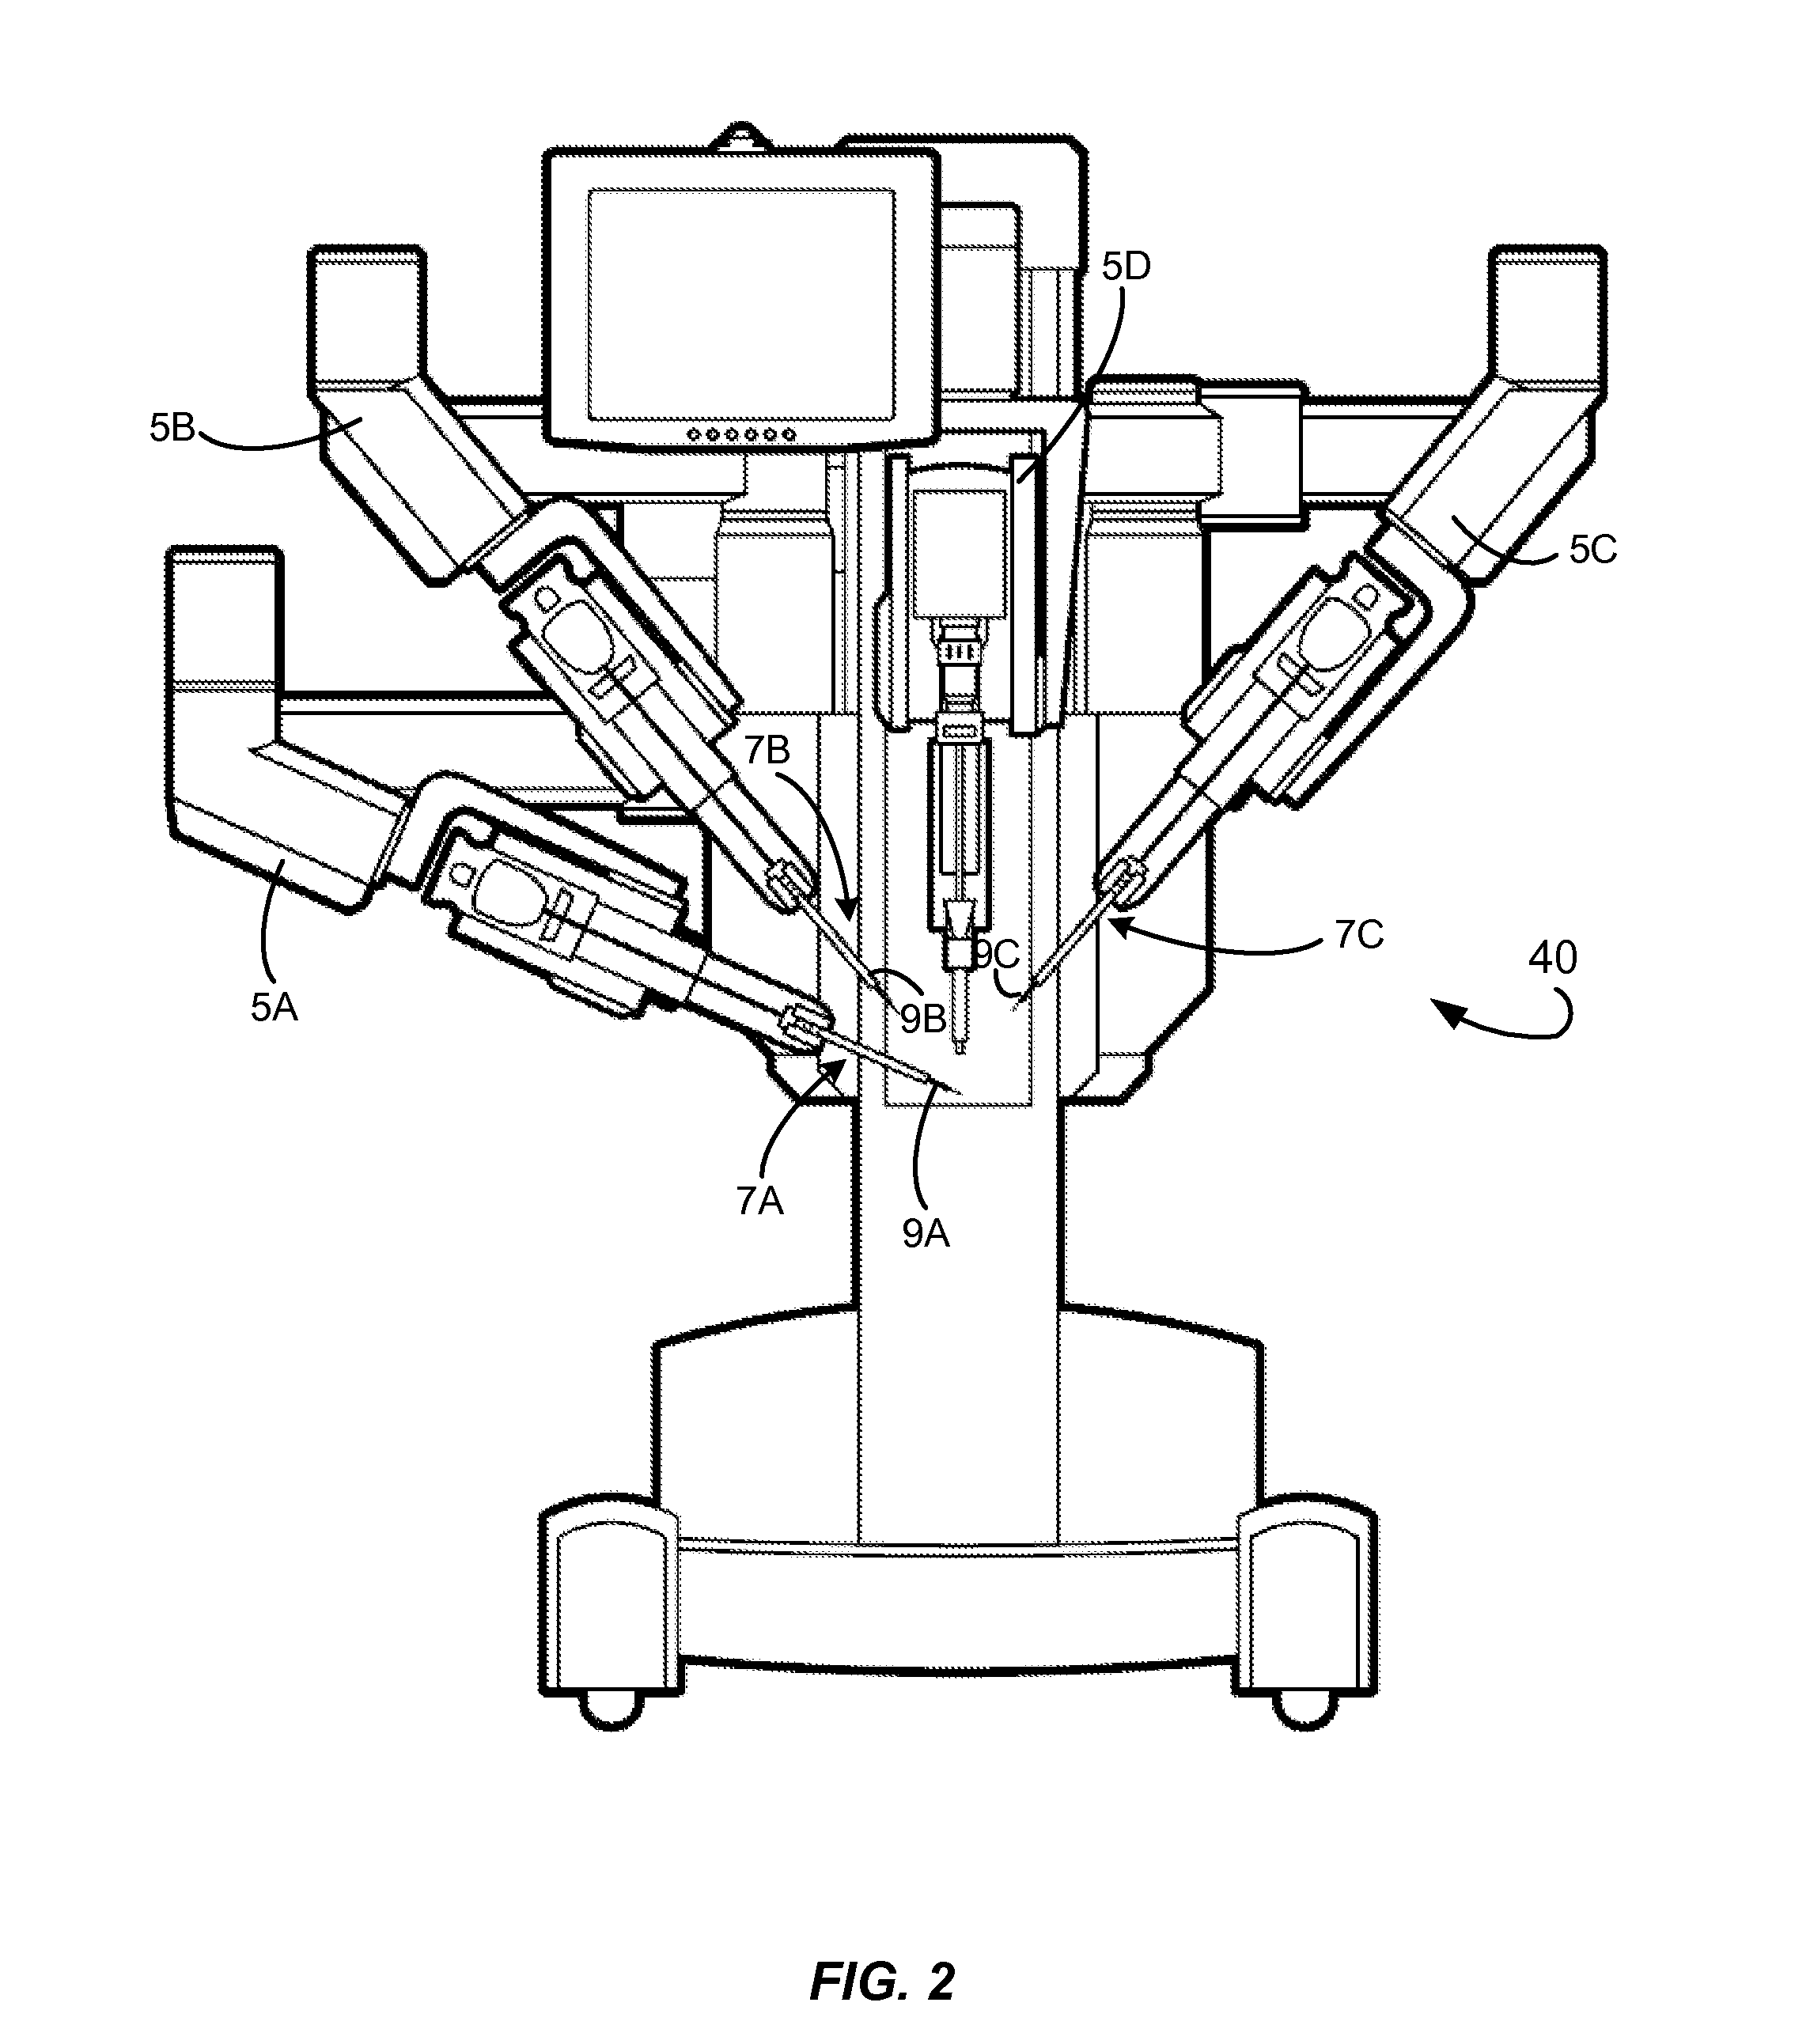 Indicator for Knife Location in a Stapling or Vessel Sealing Instrument